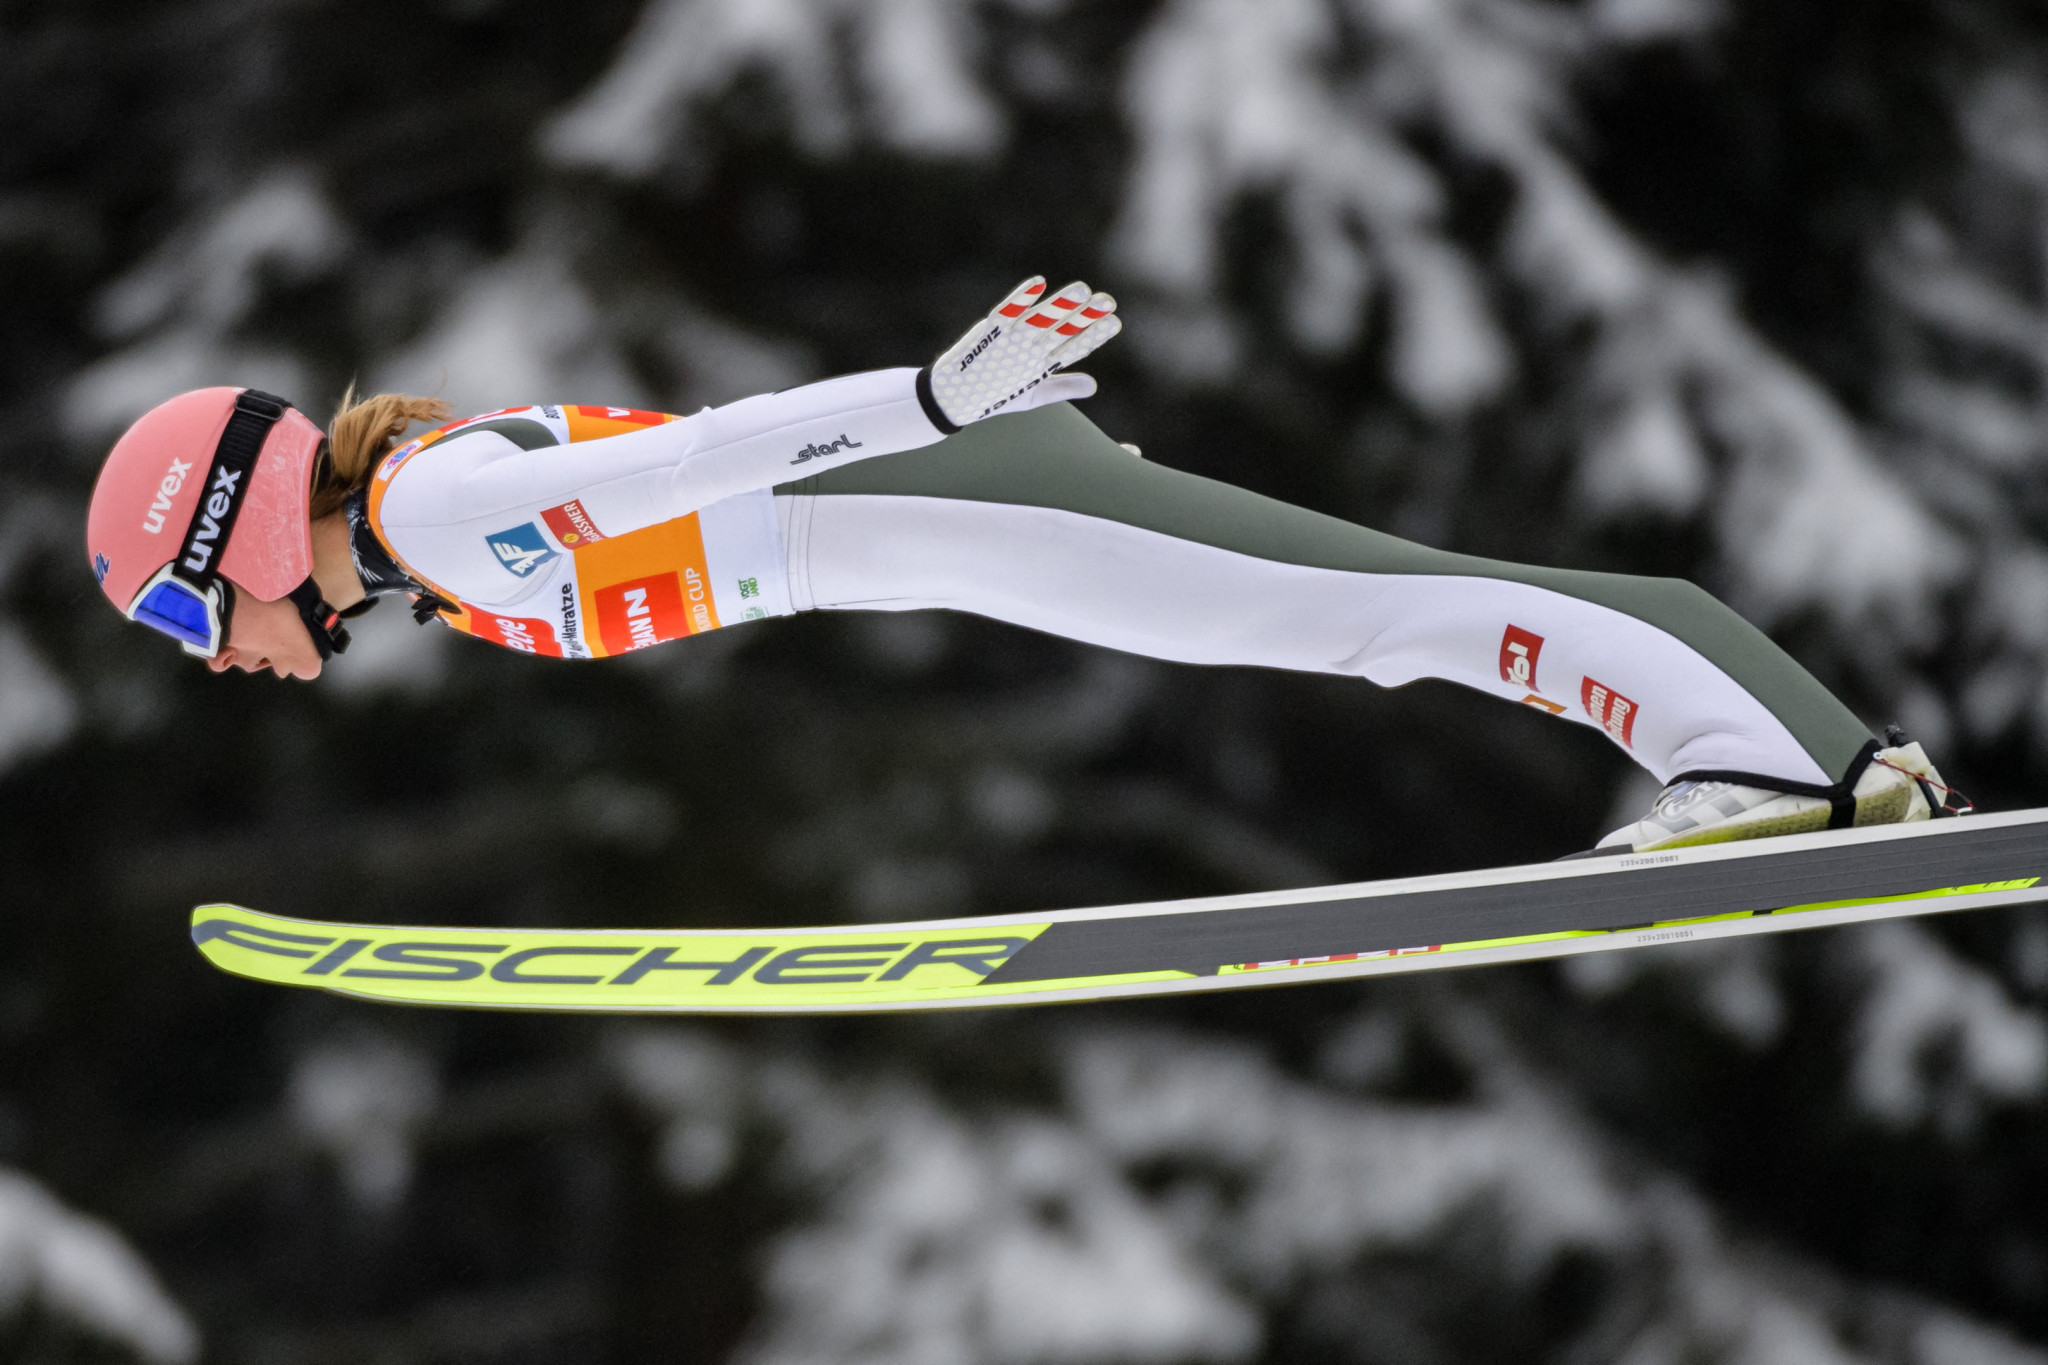 Ski jumping World Cup leader Kramer ruled out of Beijing 2022 due to COVID-19